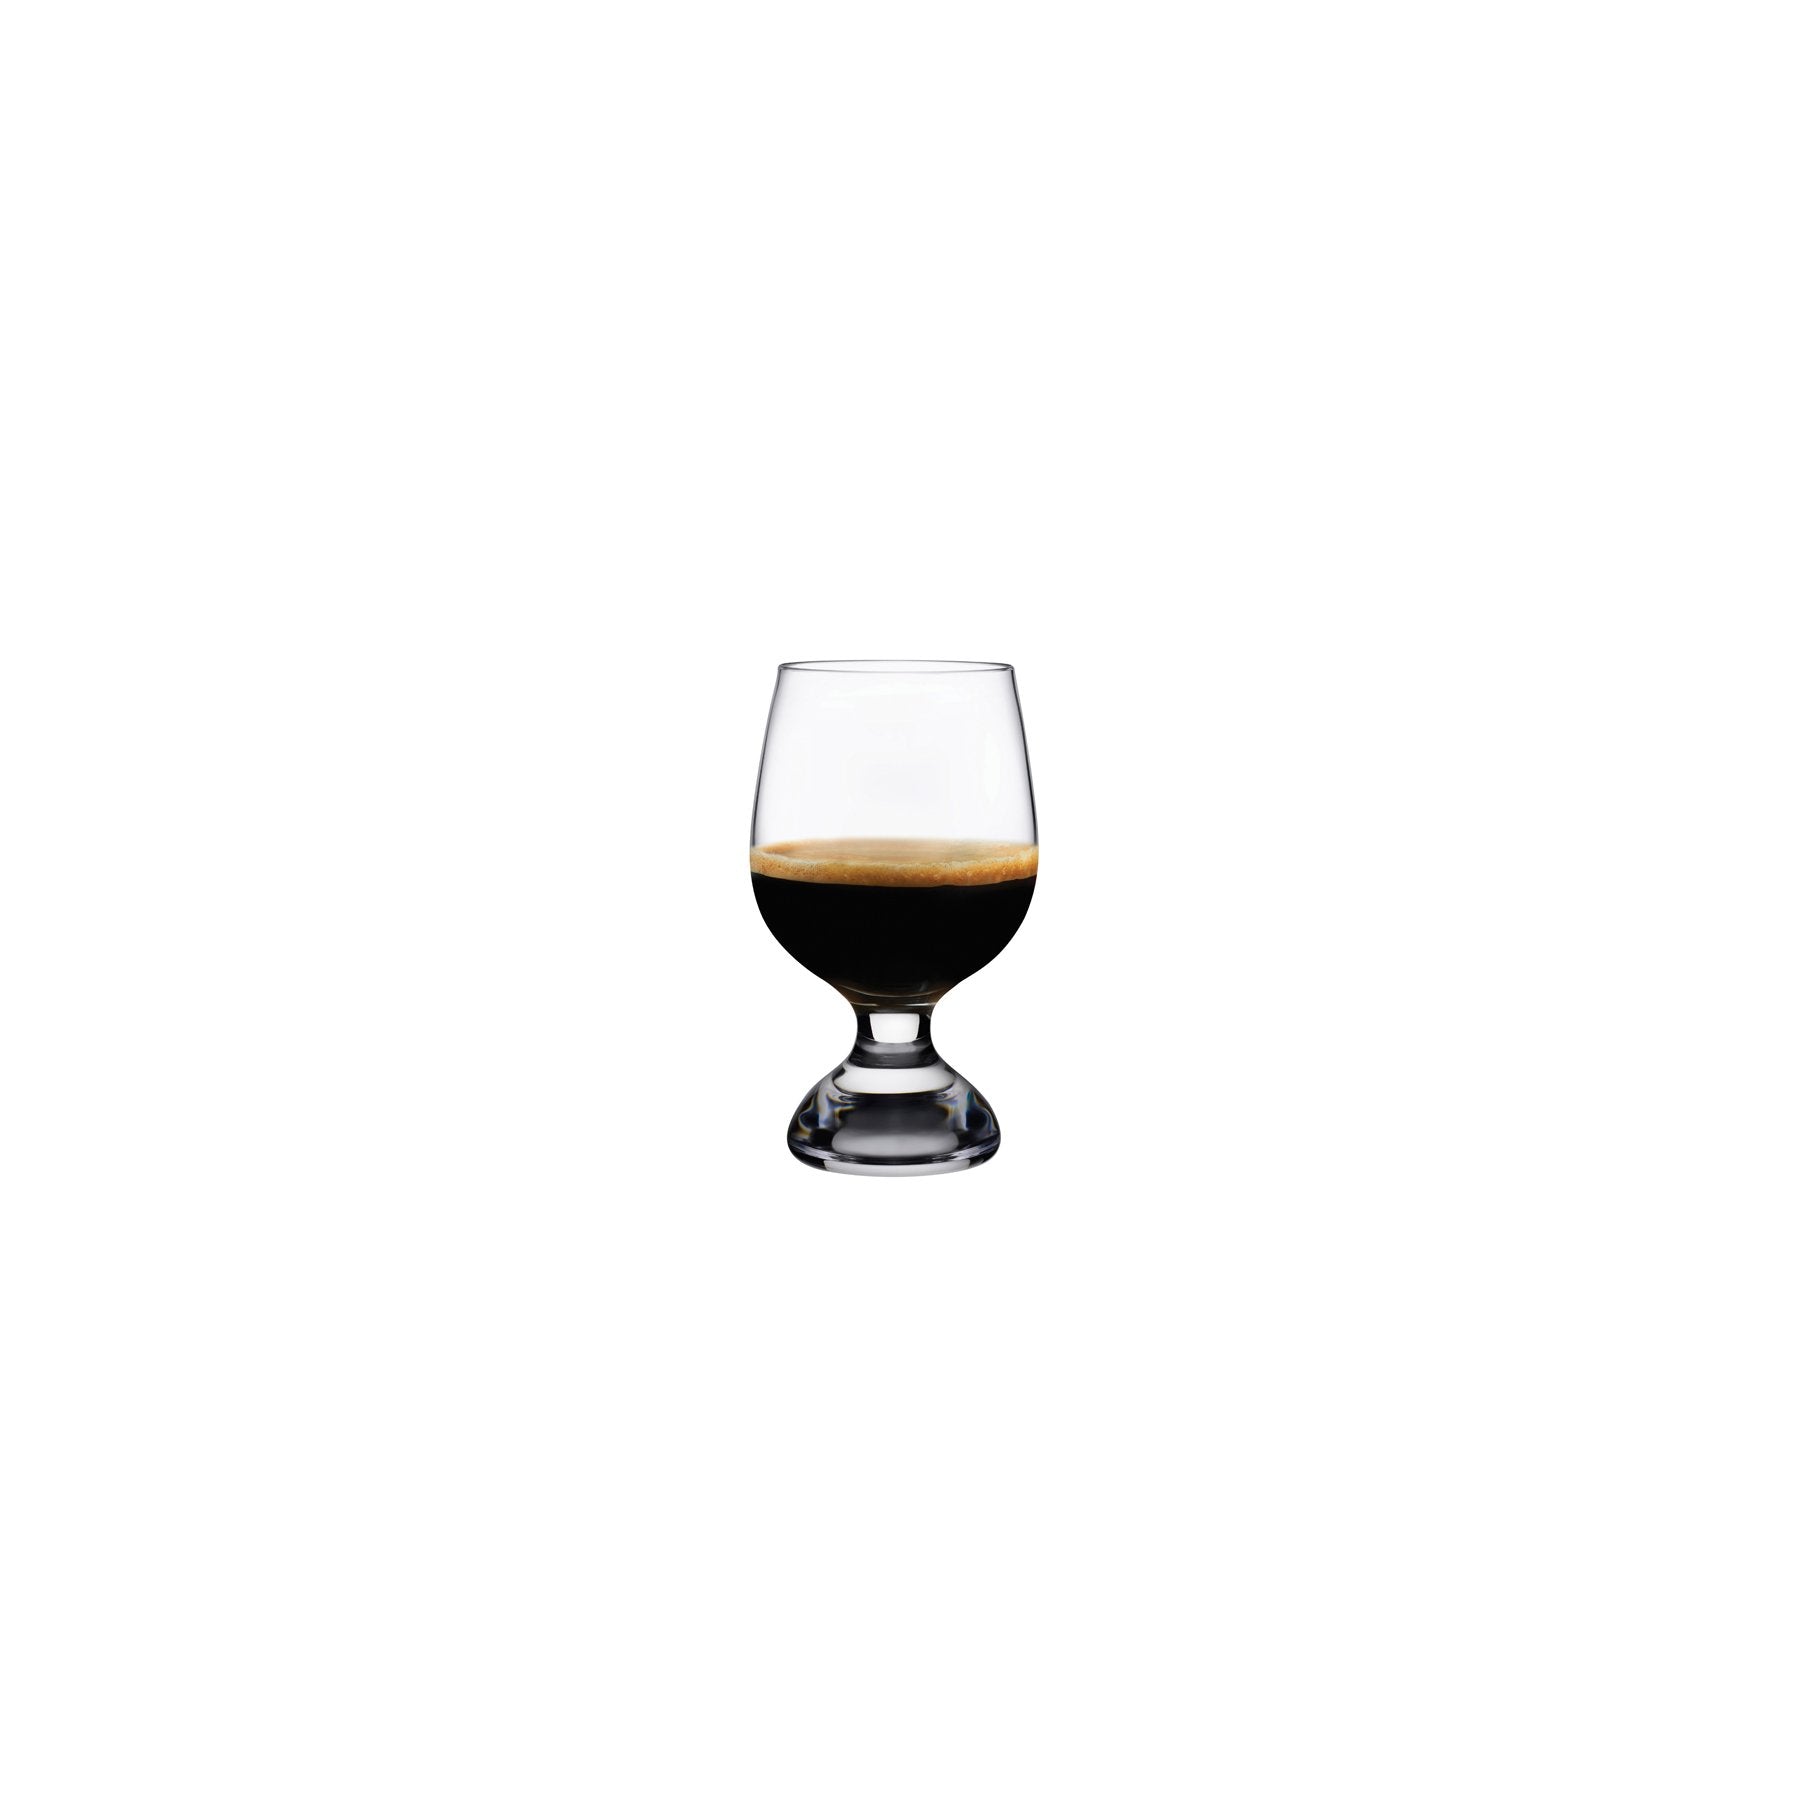 One of the glasses in Nespresso's Reveal Collection designed by Riedel